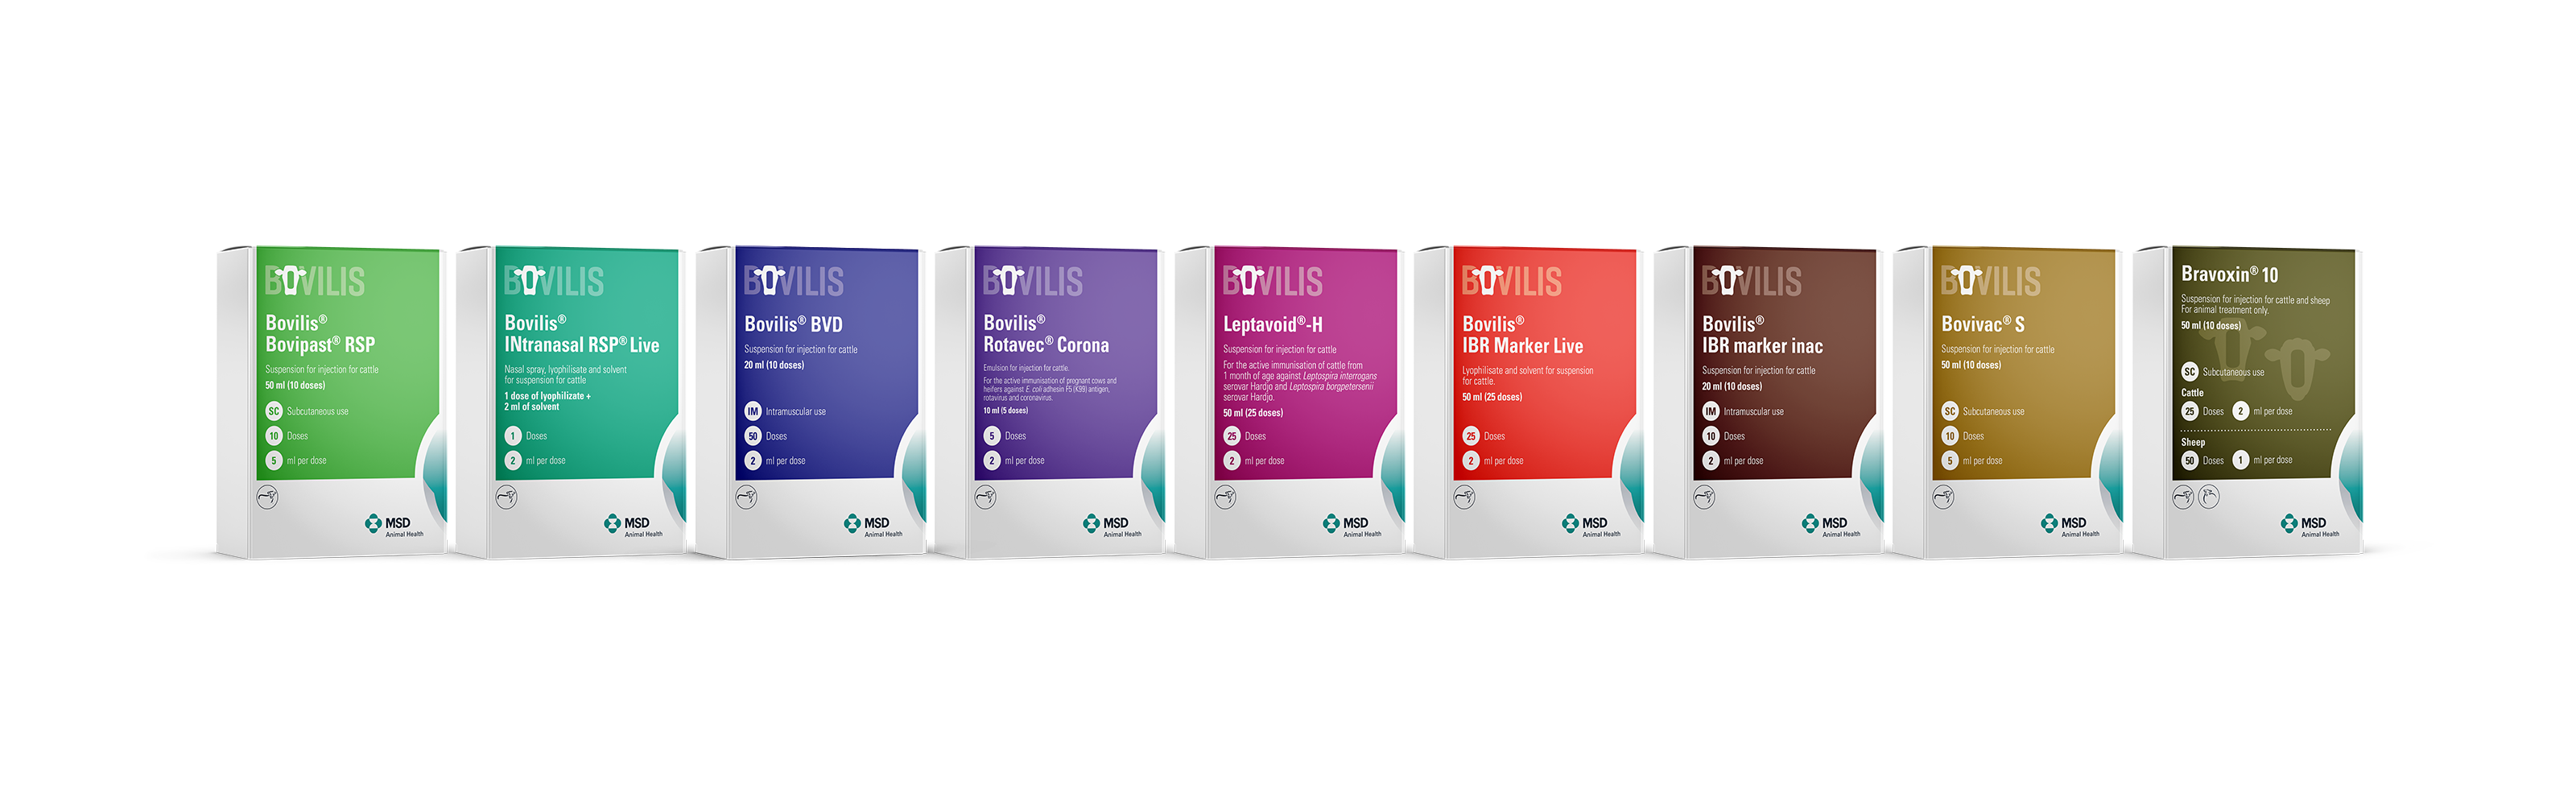 Bovilis product packaging line-up